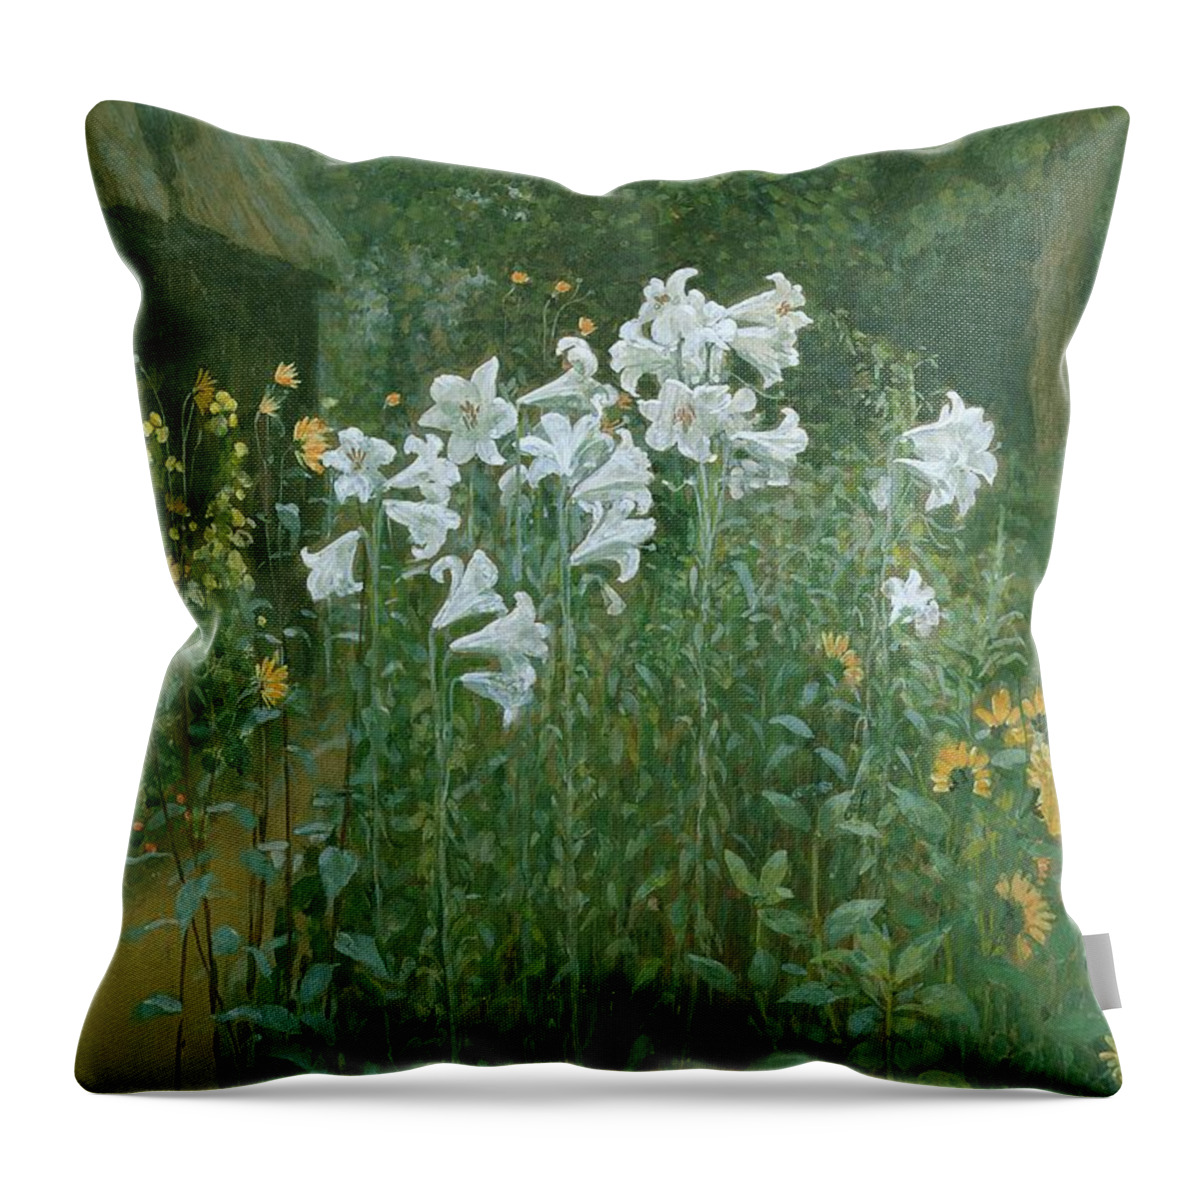 Madonna Throw Pillow featuring the painting Madonna Lilies in a Garden by Walter Crane